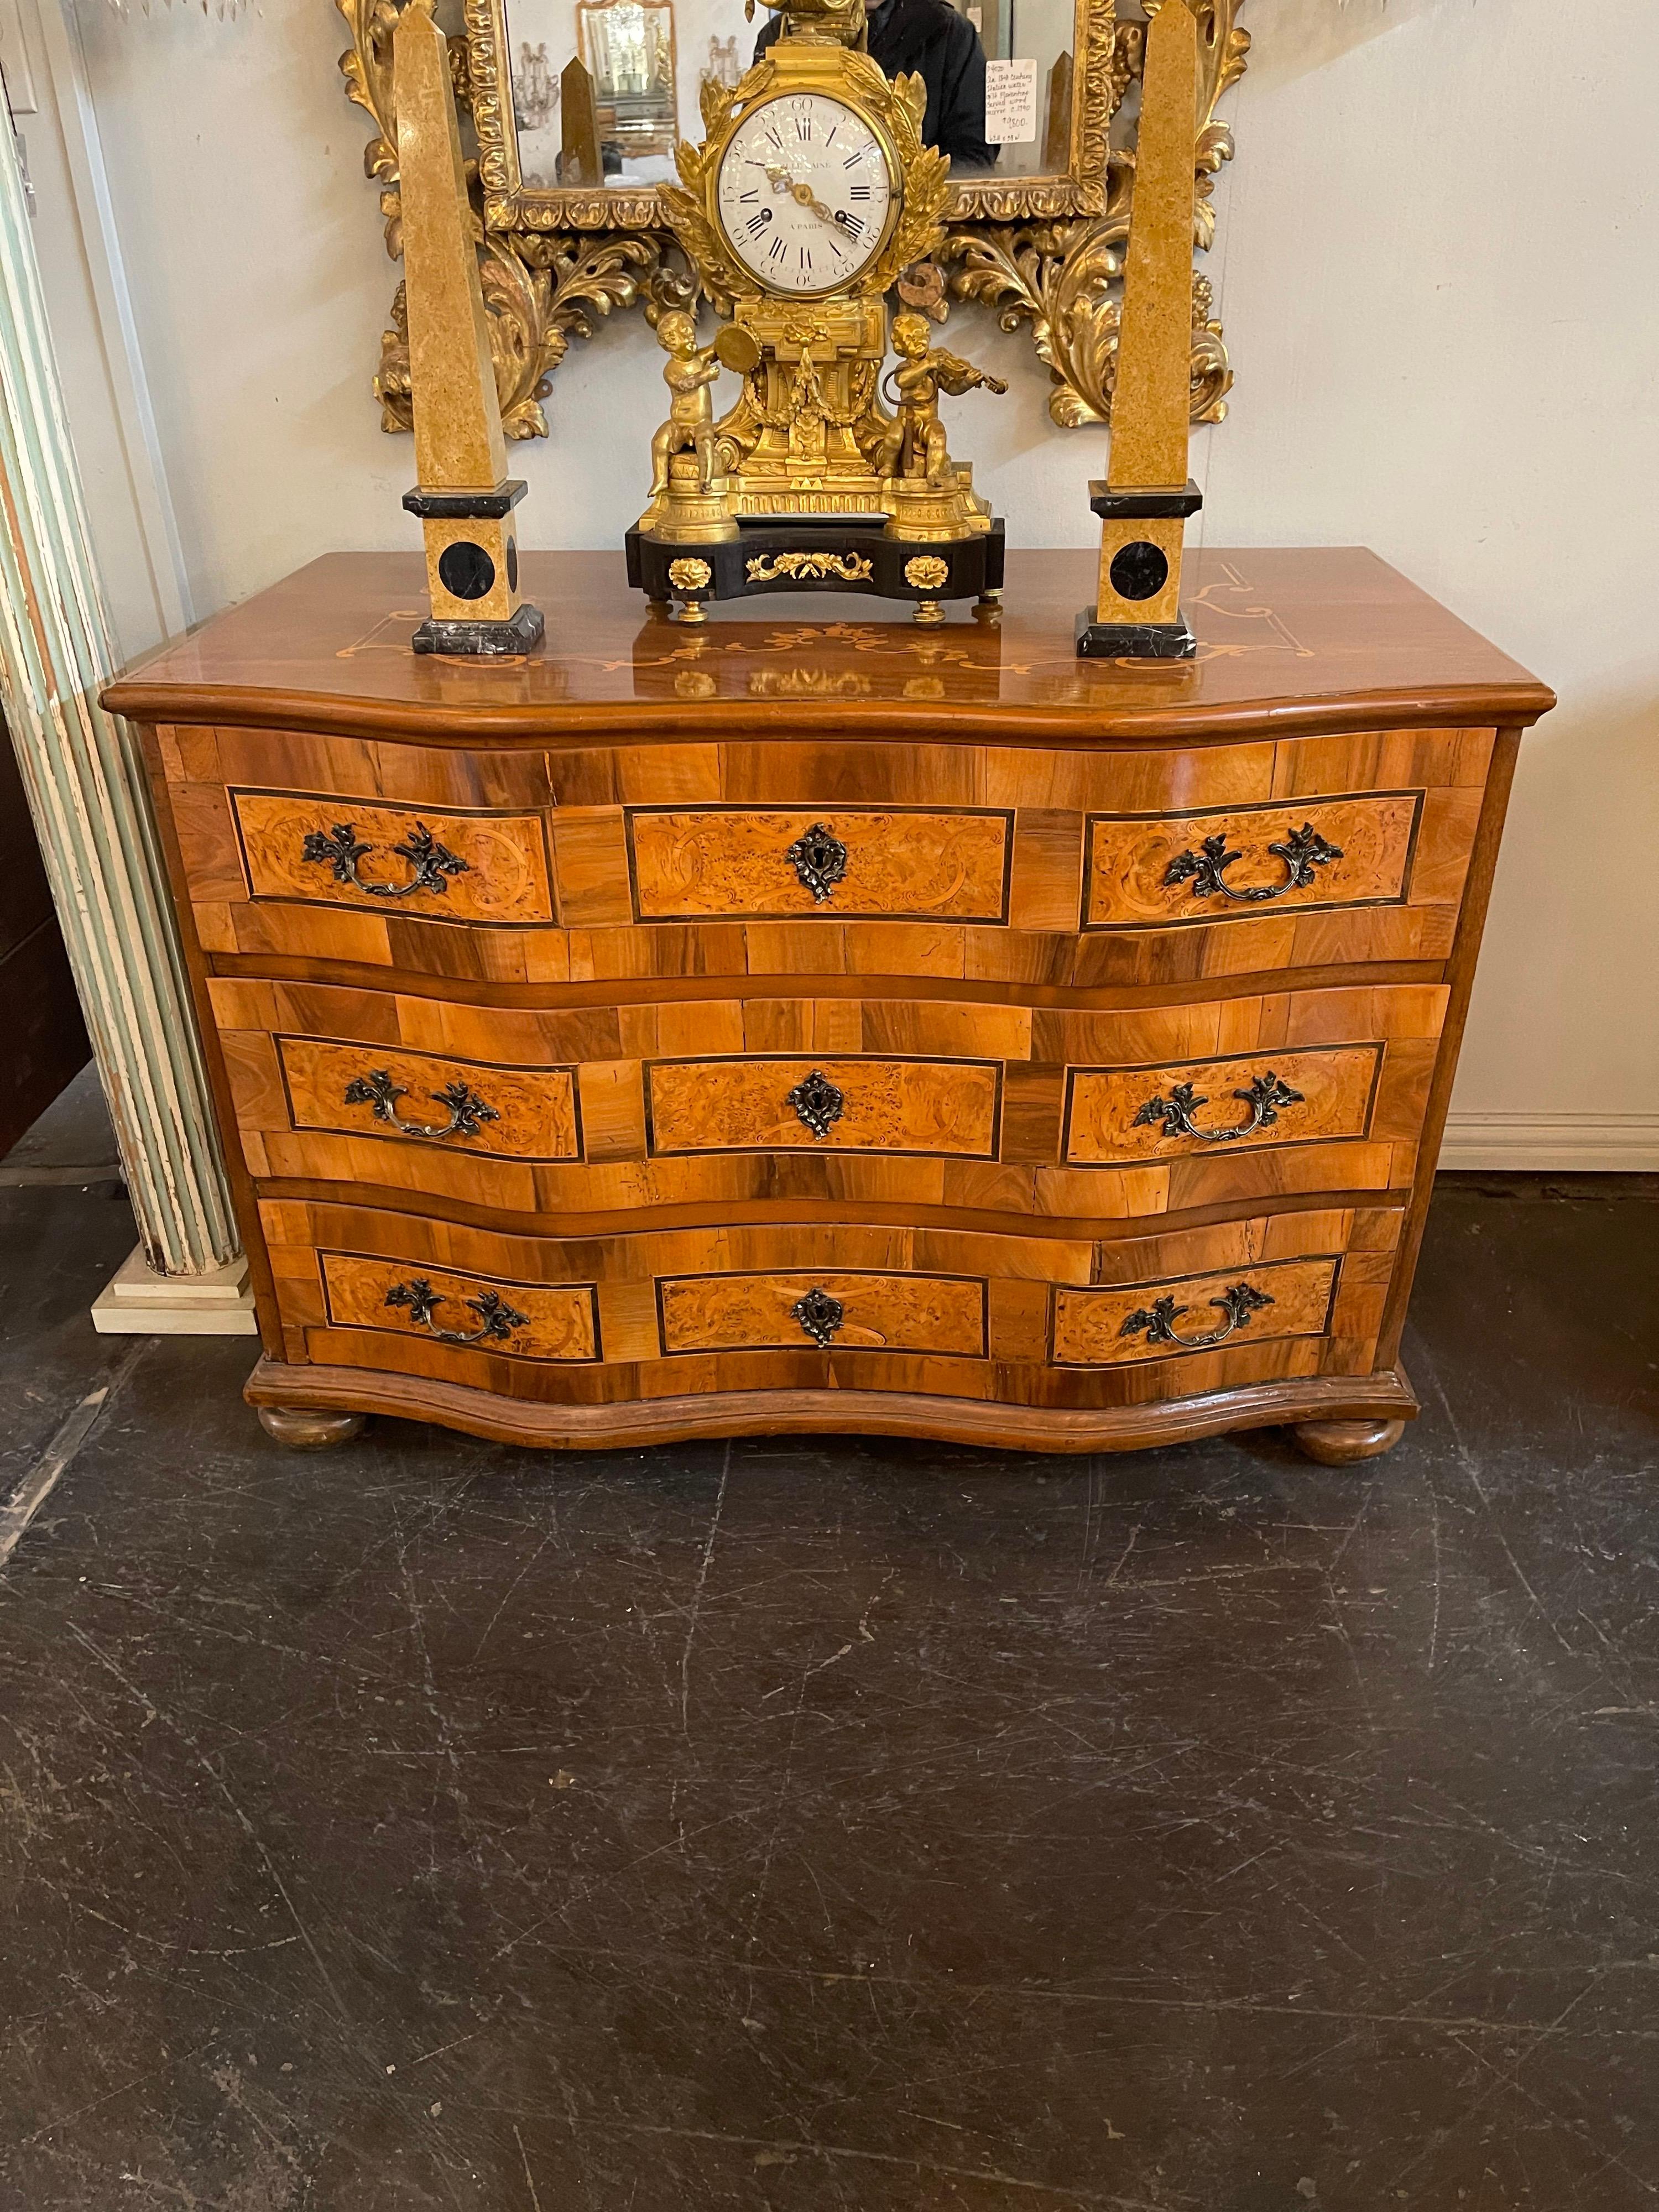 Remarkable 18th century South German (possibly Bavaria) shaped-front commode. The marquetry inlaid double serpentine top above three fitted drawers with outstanding walnut veneer and exotic oak panels that are banded with a narrow strip of inlaid